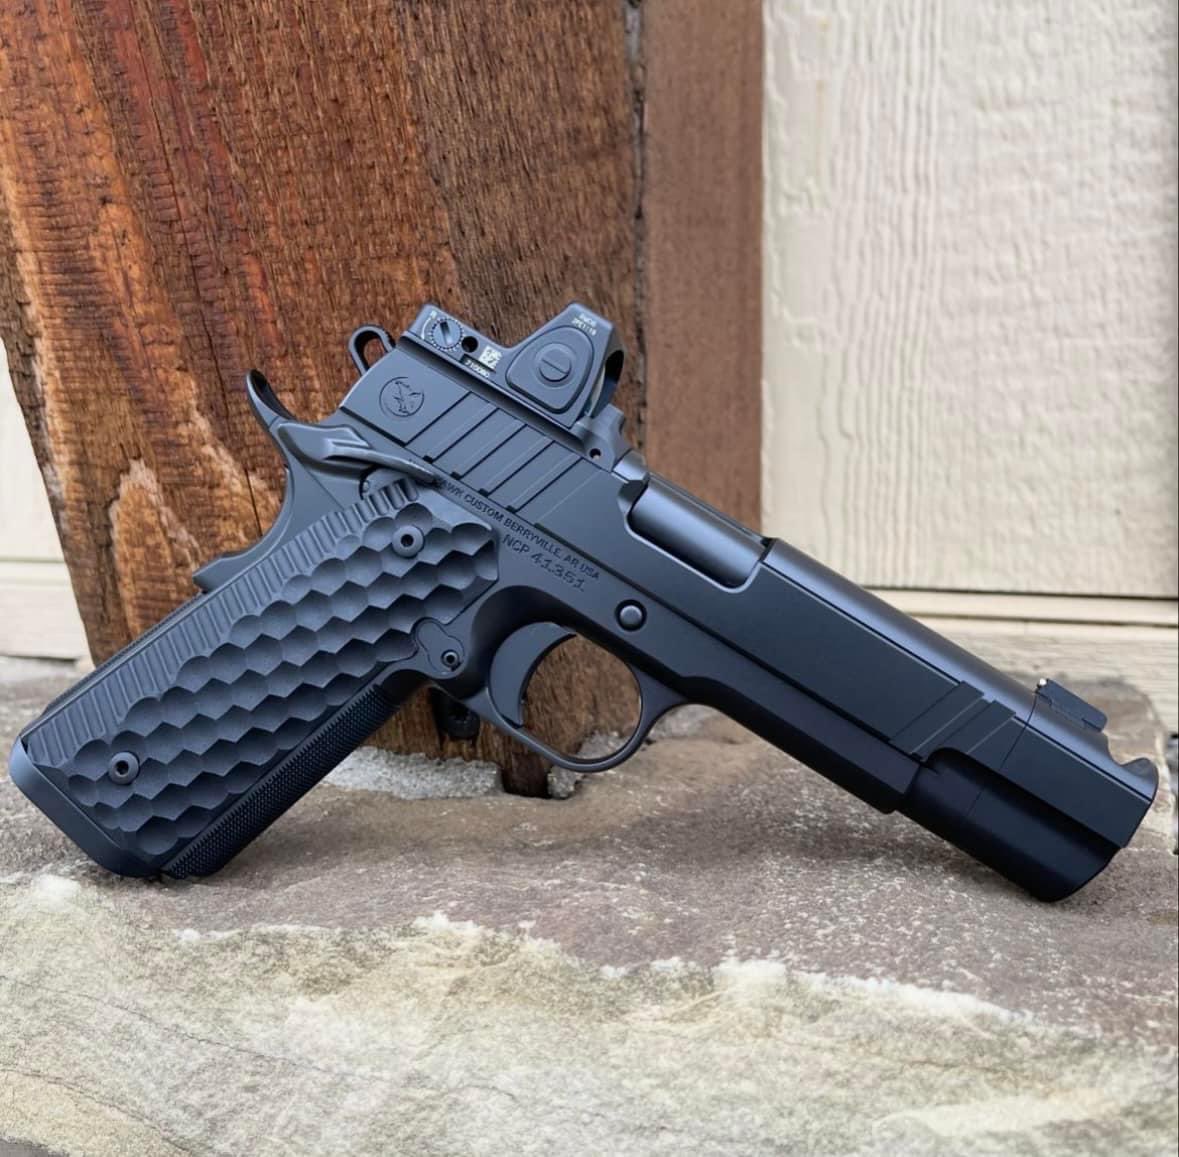 Black out Fire Hawk with all the goodies 😍 .45 ACP, 9mm, or 10mm! CA through EGI too. That hand blended single port comp keeps the classic look while bringing the performance!